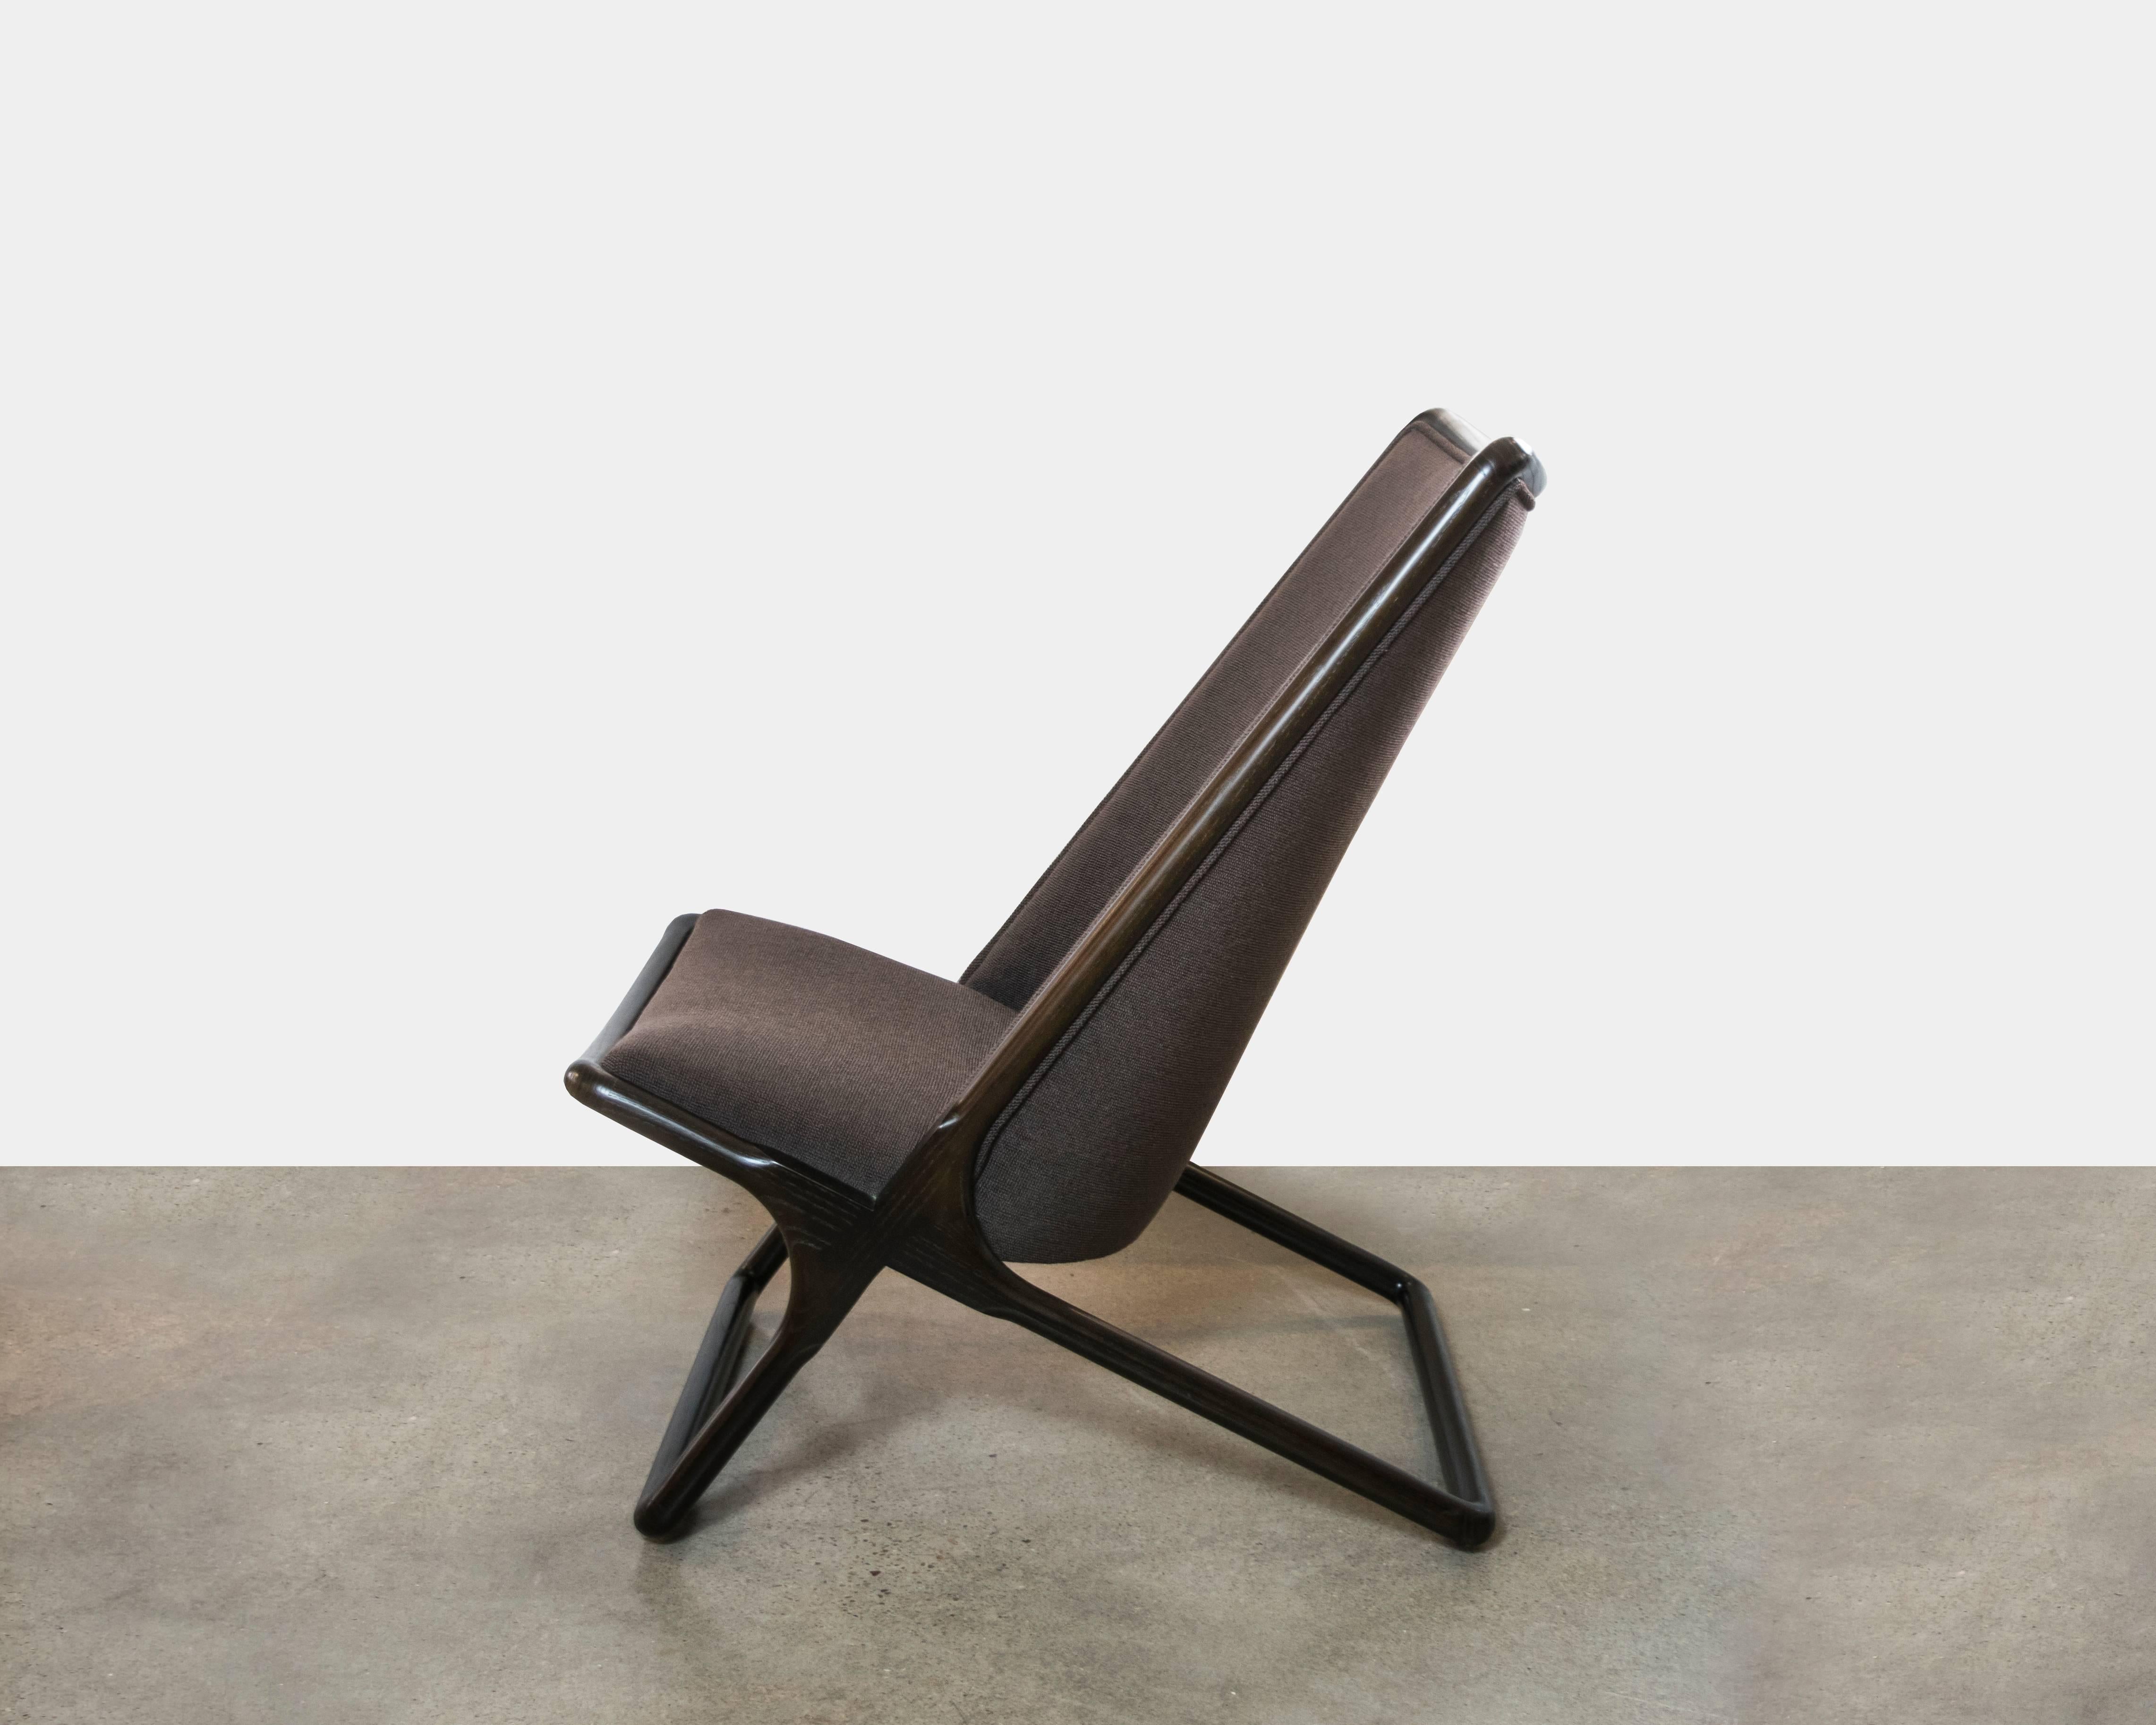 Exceptionally rare Ward Bennett Scissor chair in beautiful chocolate brown wood with slight cerusing. Upholstered in Geiger Textiles Iron Cloth, color I9571 Umber.